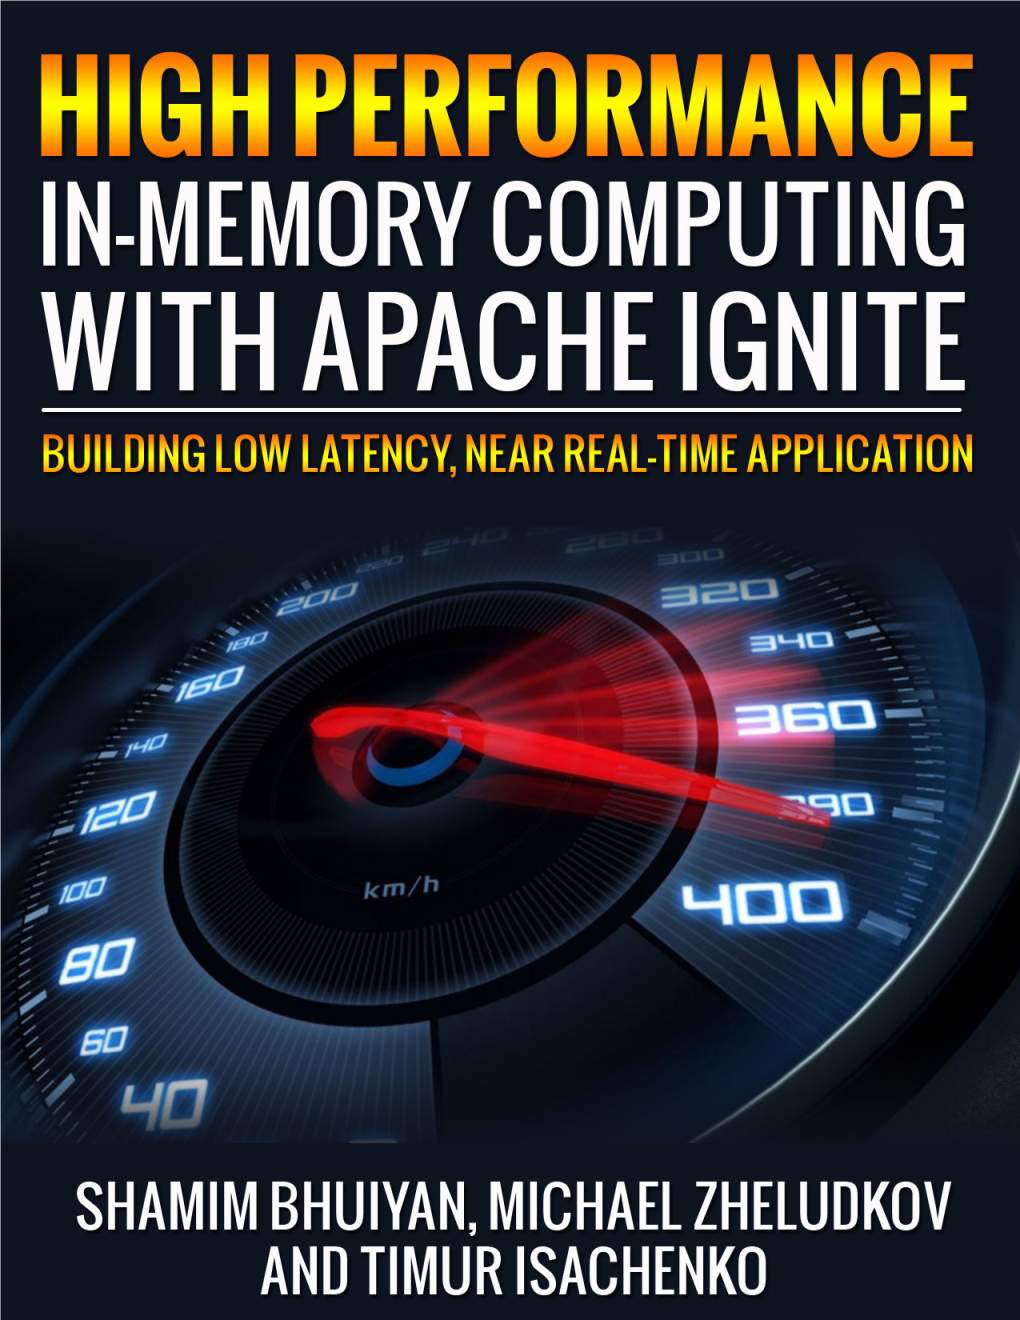 High Performance In-Memory Computing with Apache Ignite Building Low Latency, Near Real Time Application